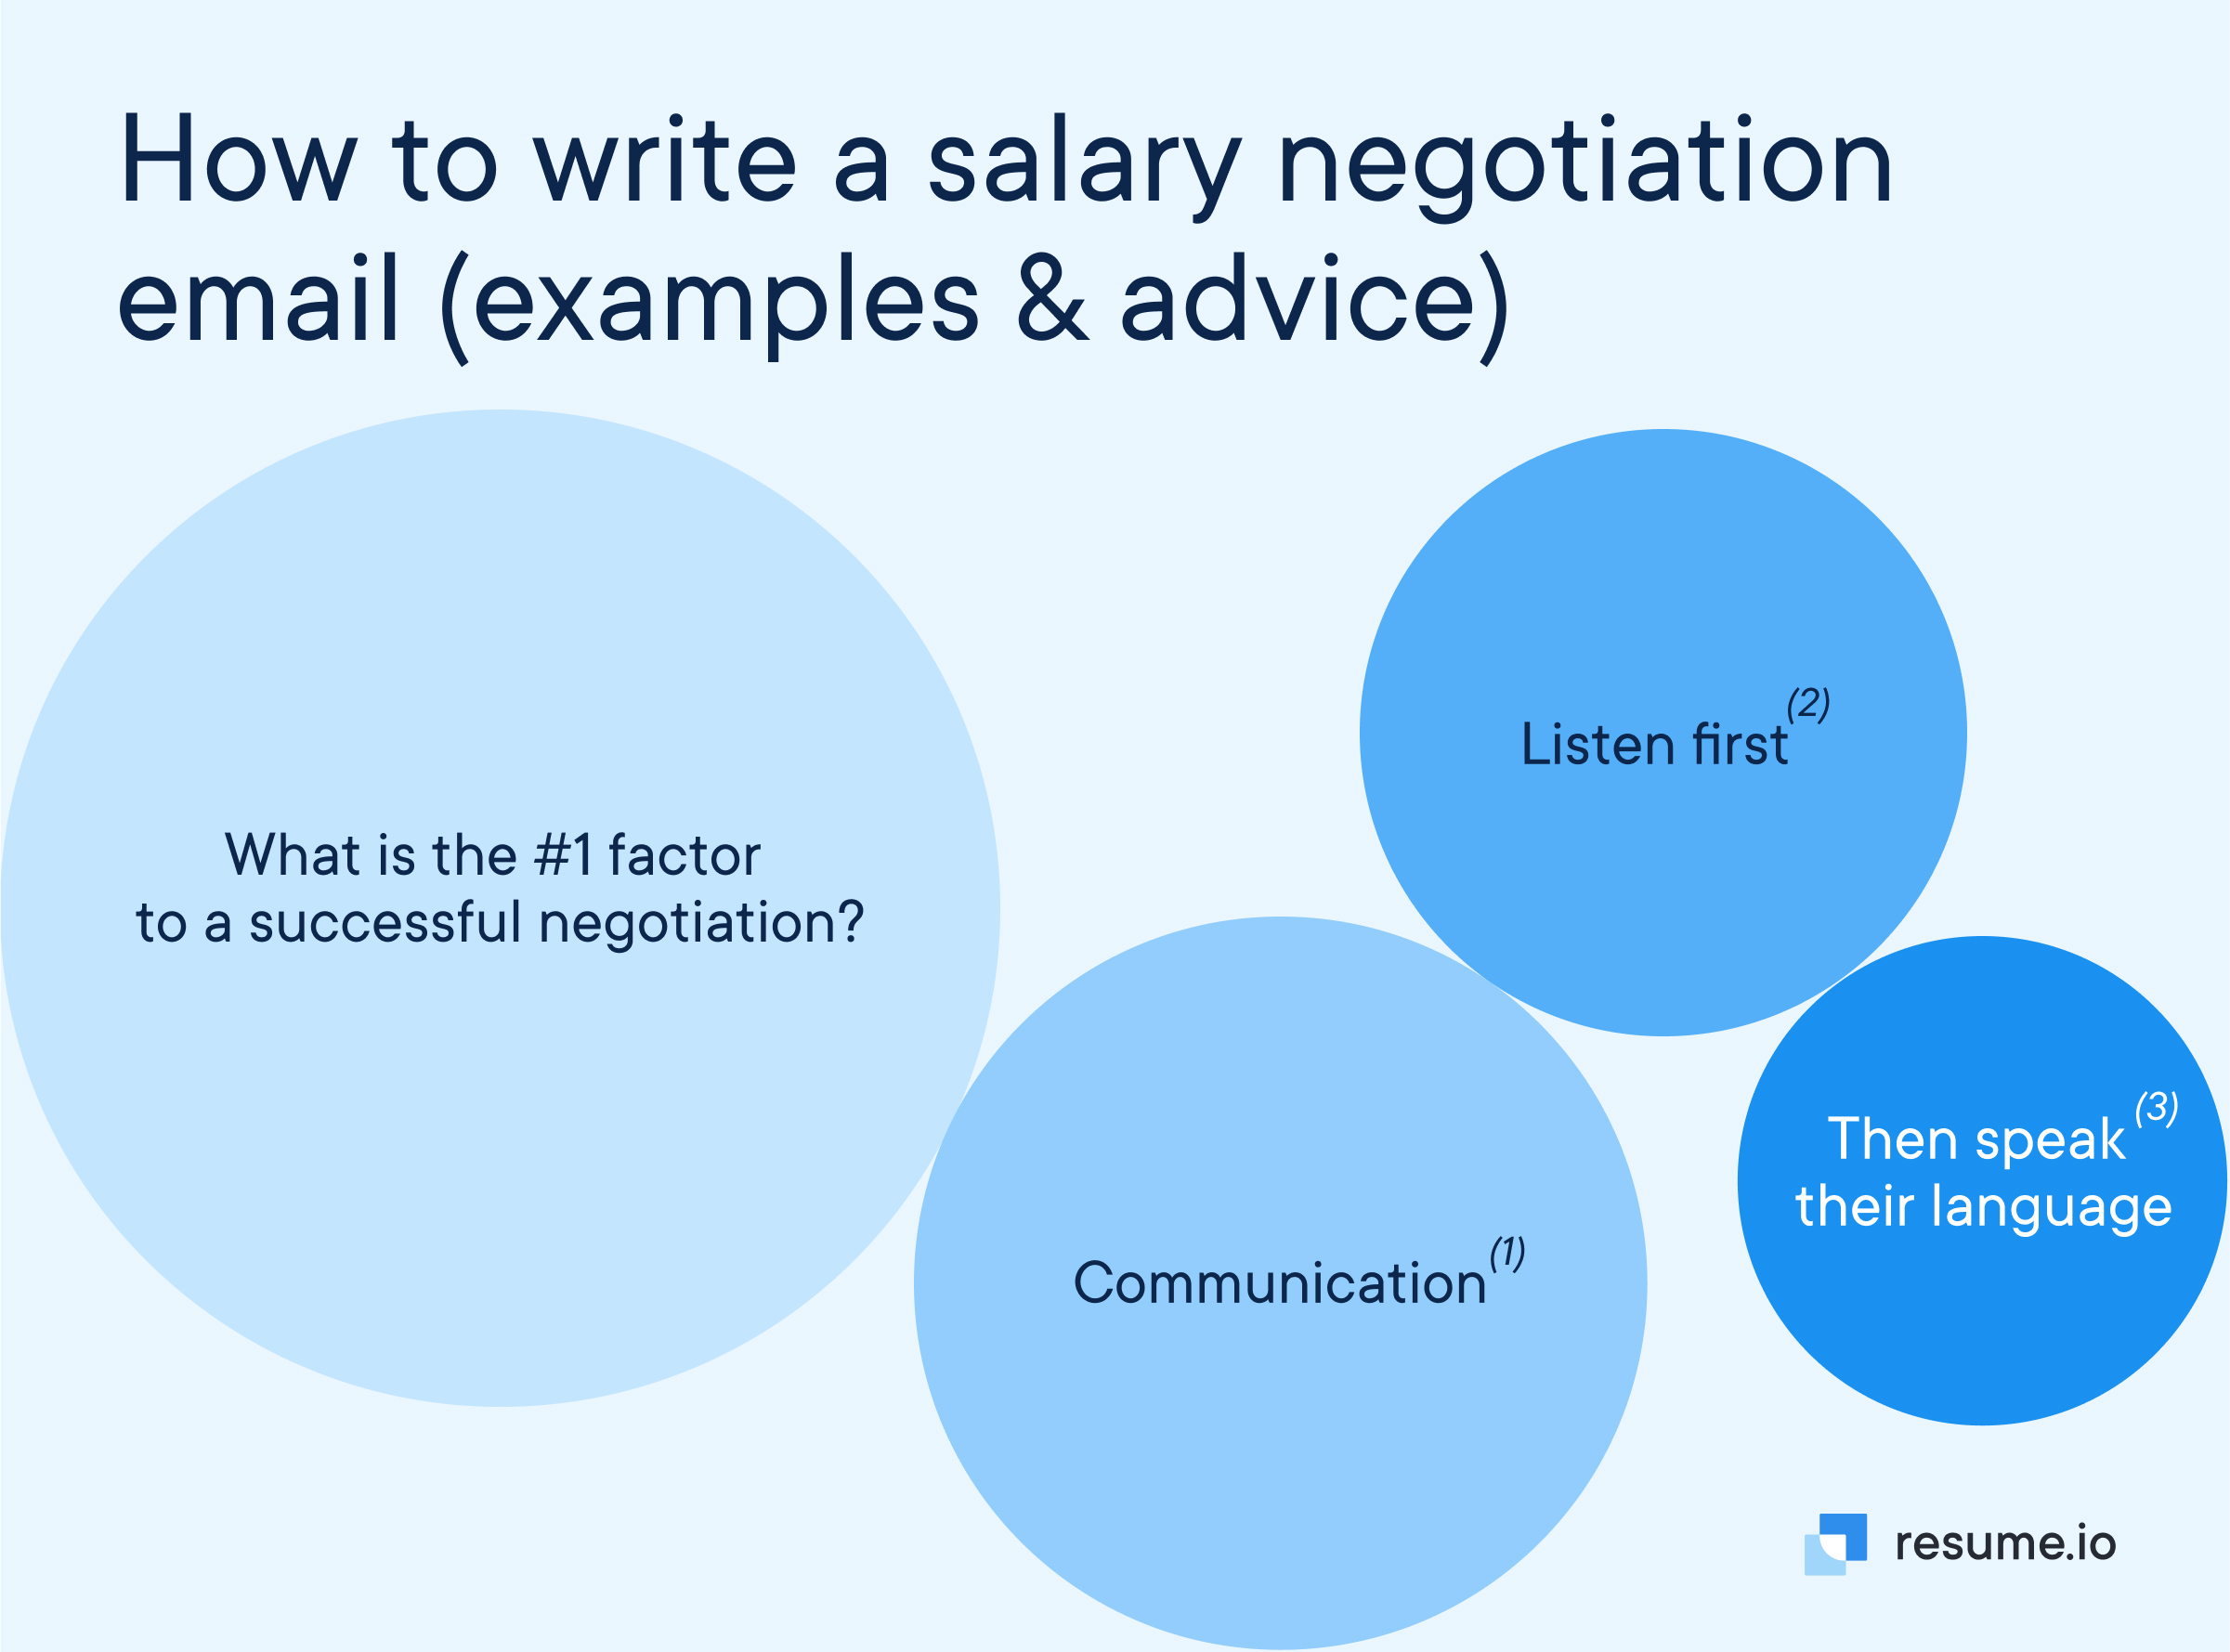 Circles with the 3 most successful negotiation factor